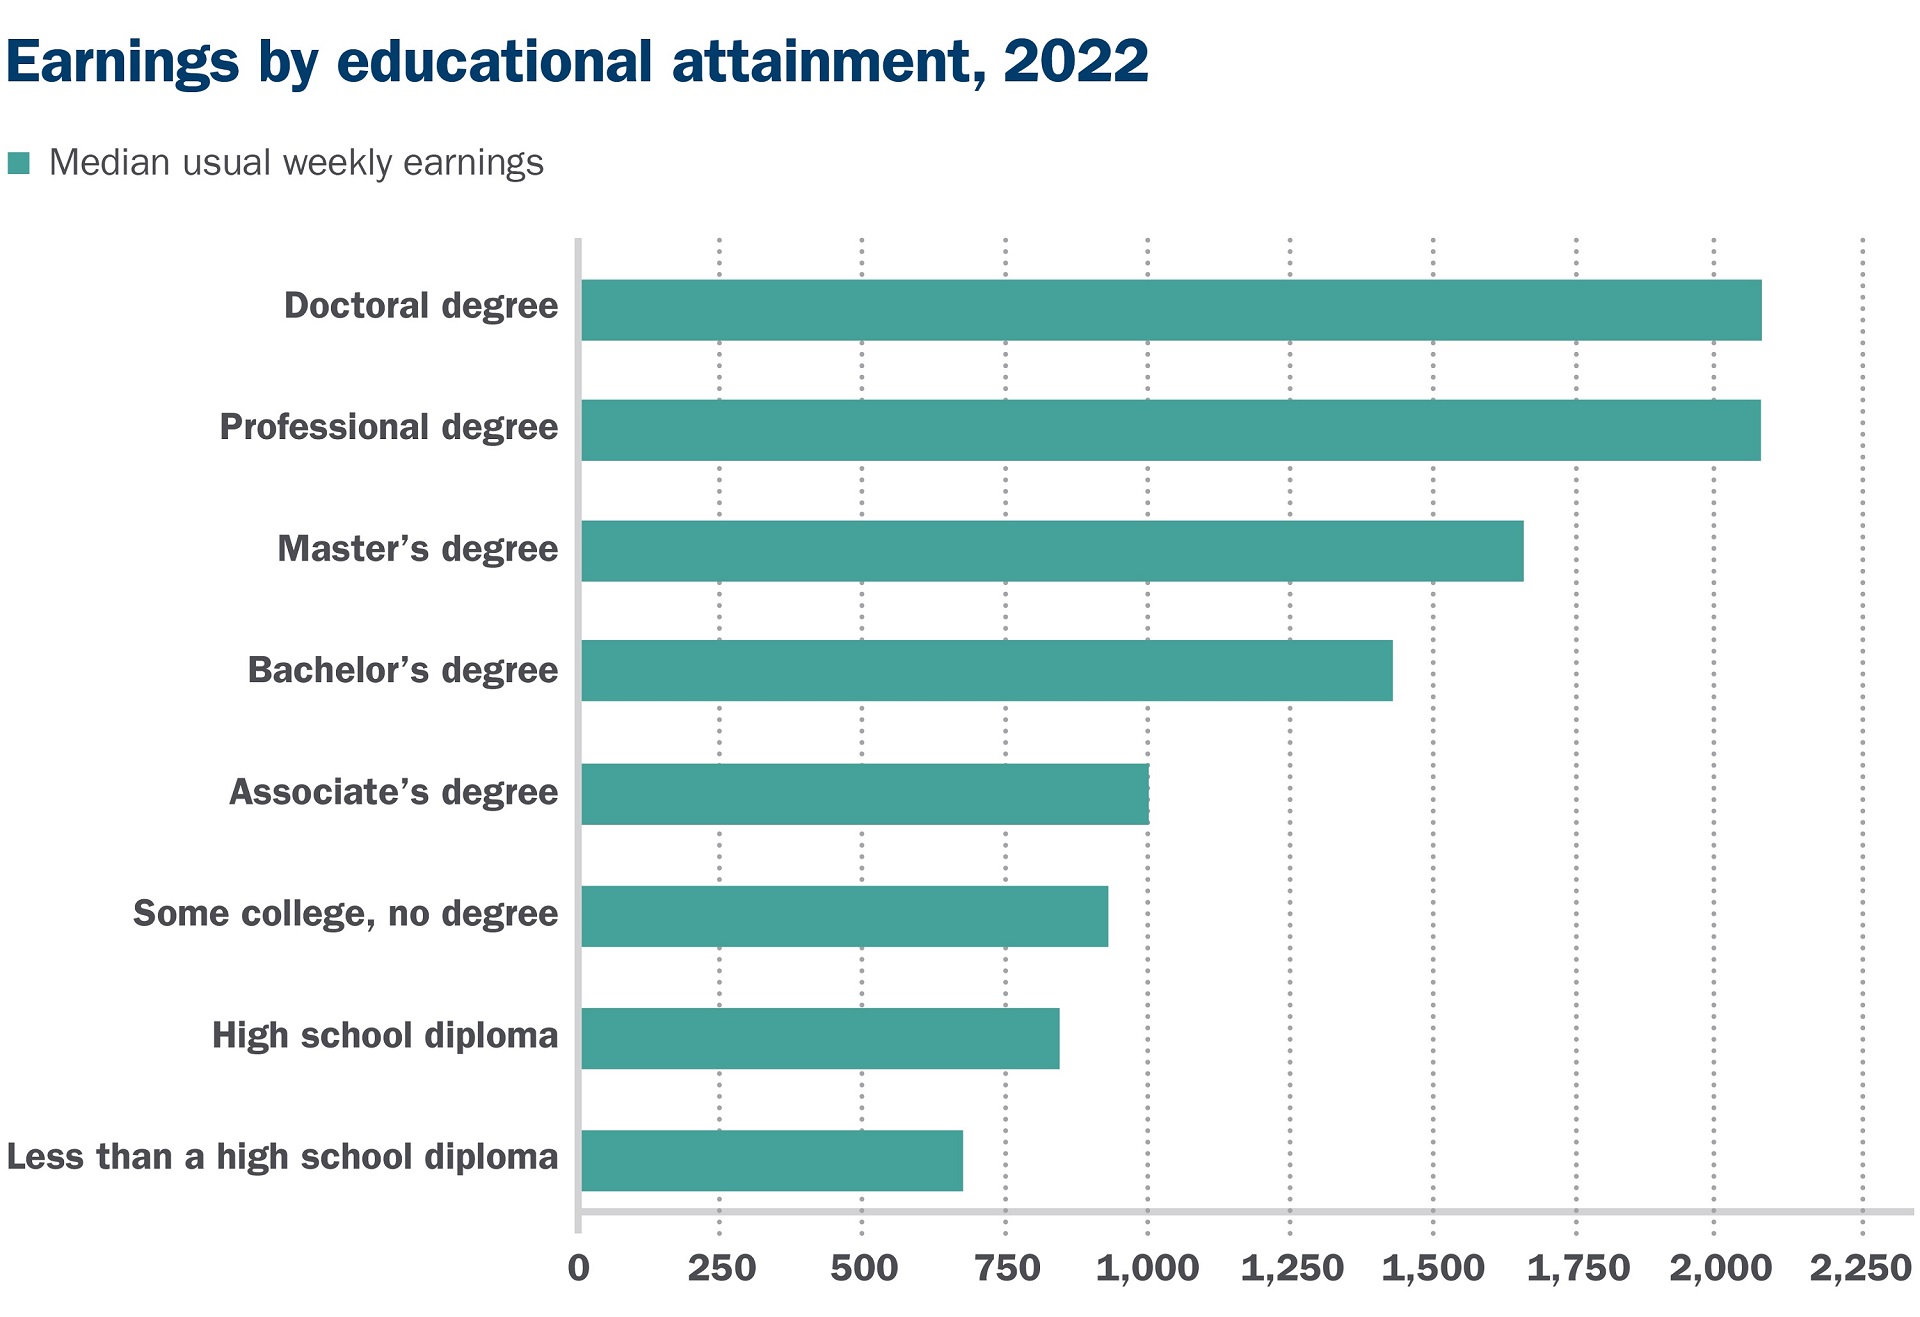 Bar graph of earnings and unemployment rates by educational attainment in 2022